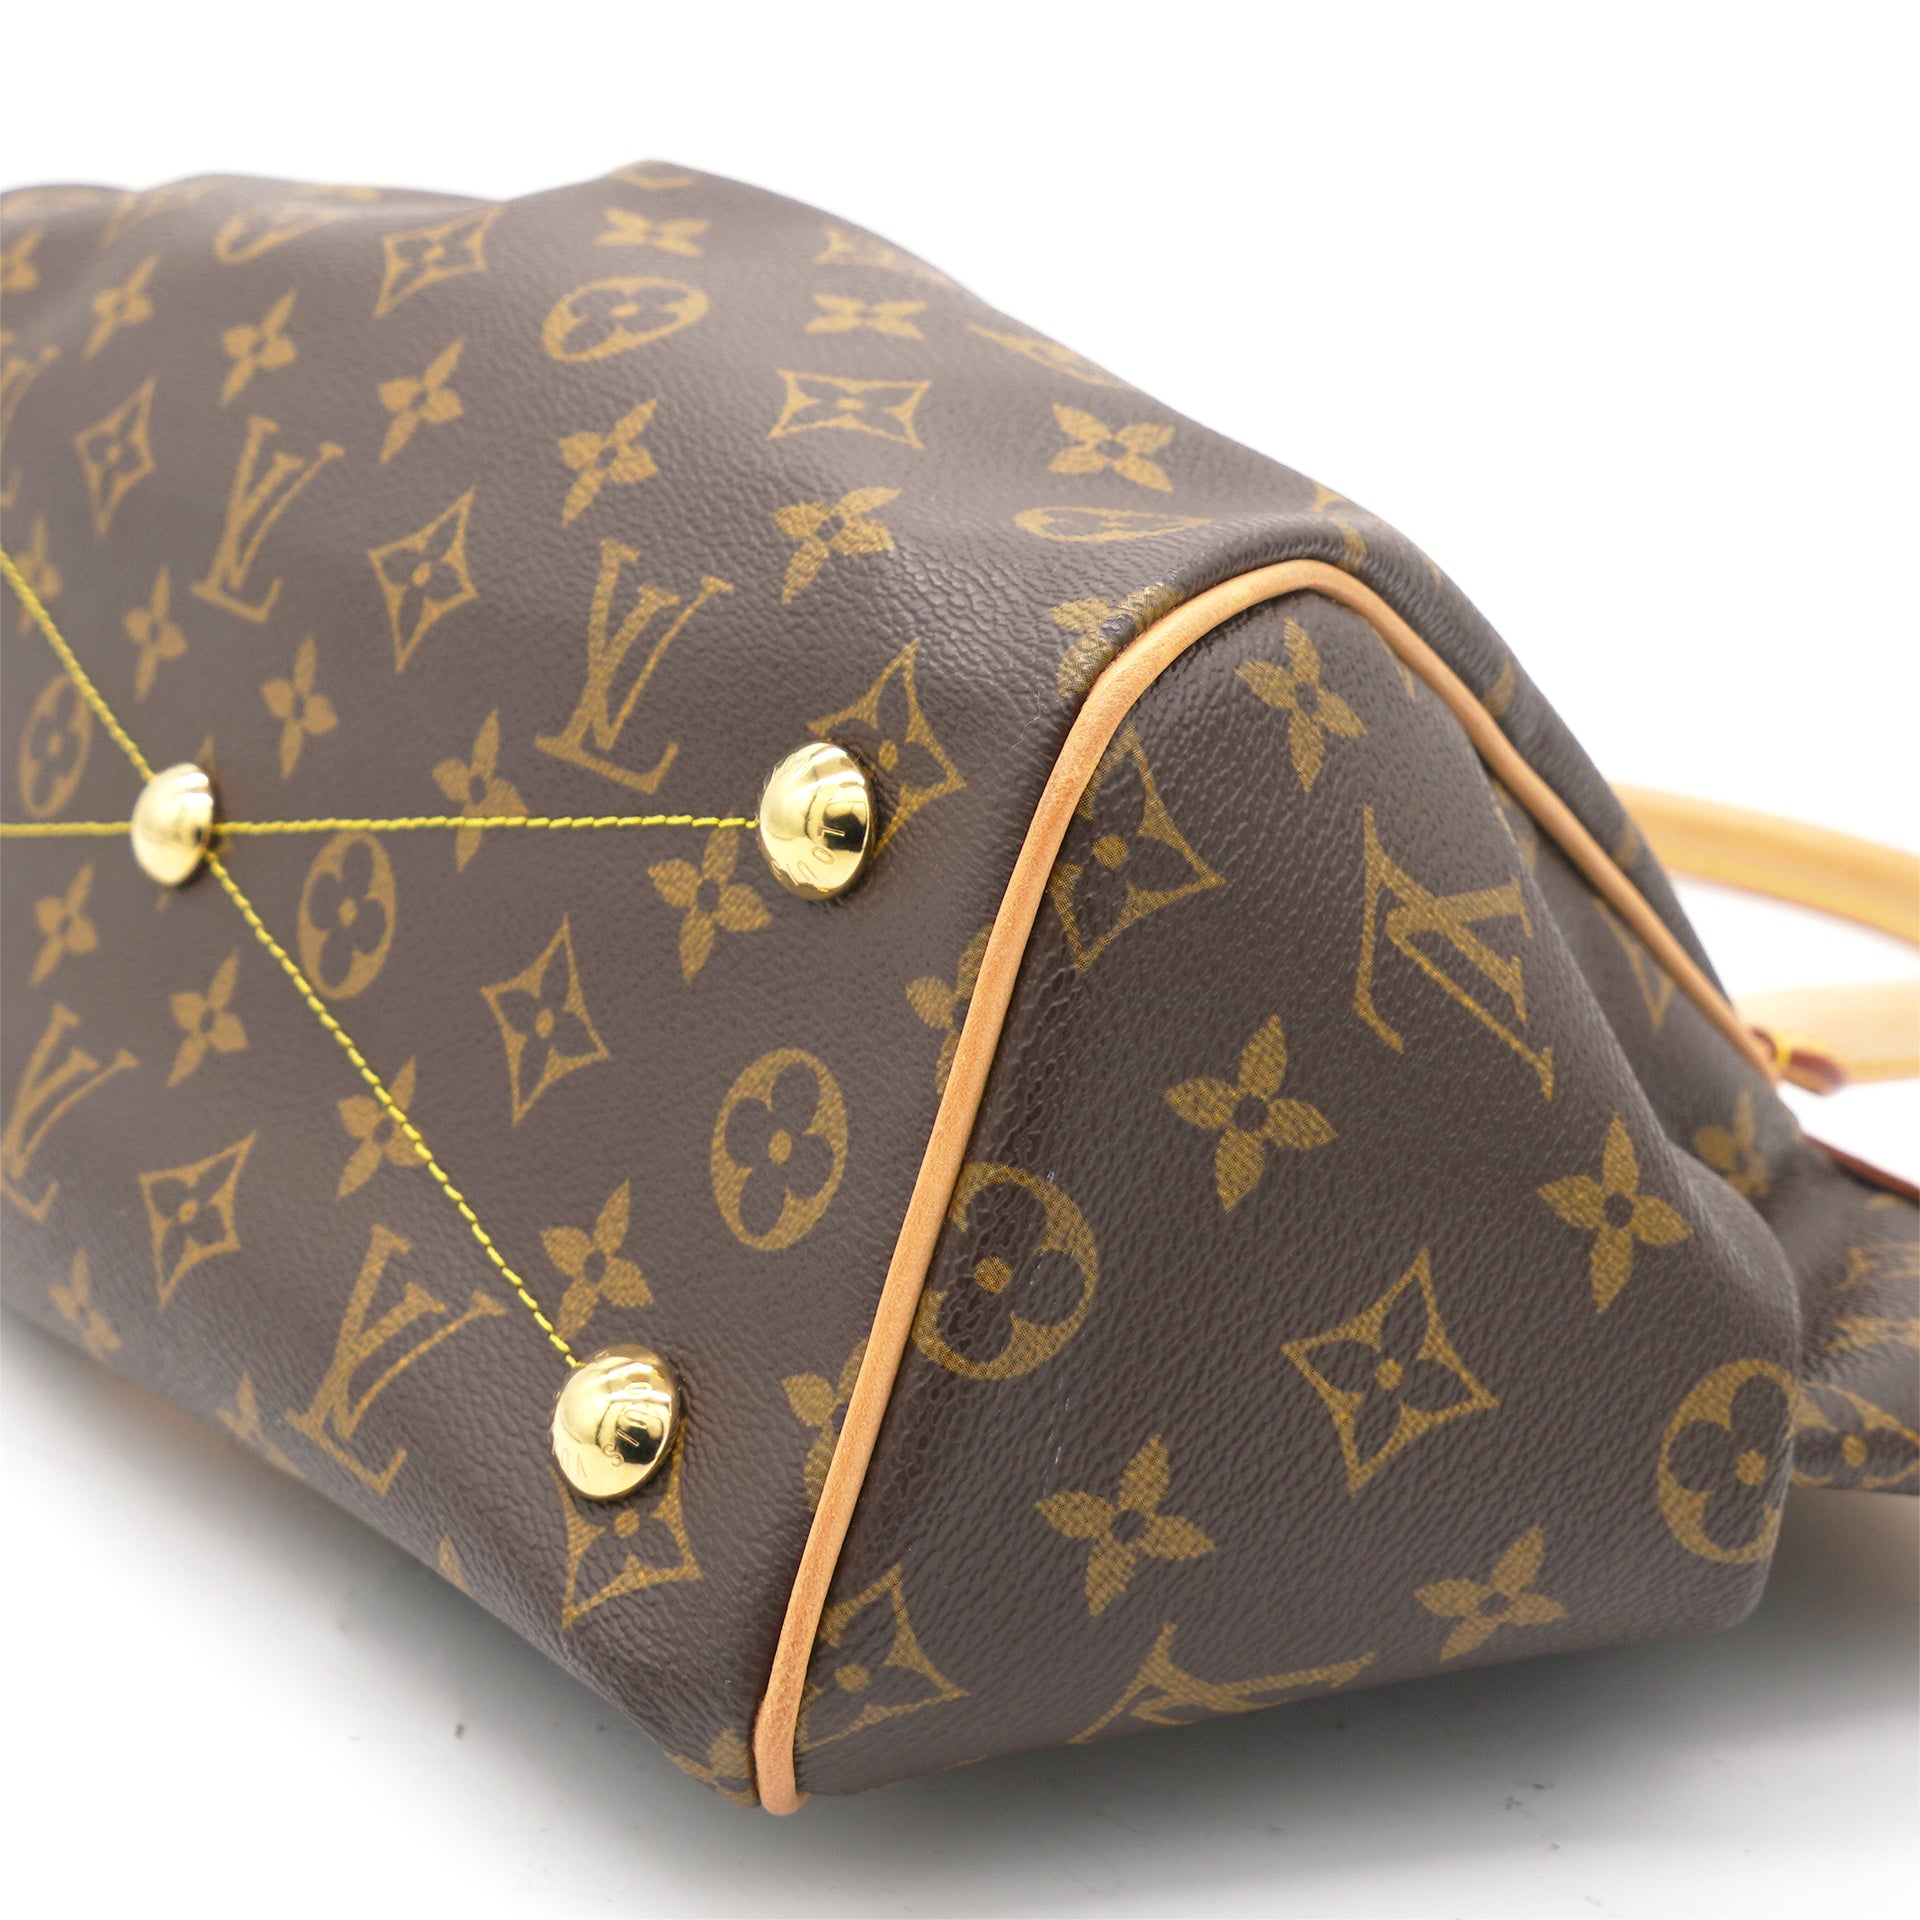 HOW TO DYE THE VACHETTA LEATHER ON A MONOGRAM CANVAS 